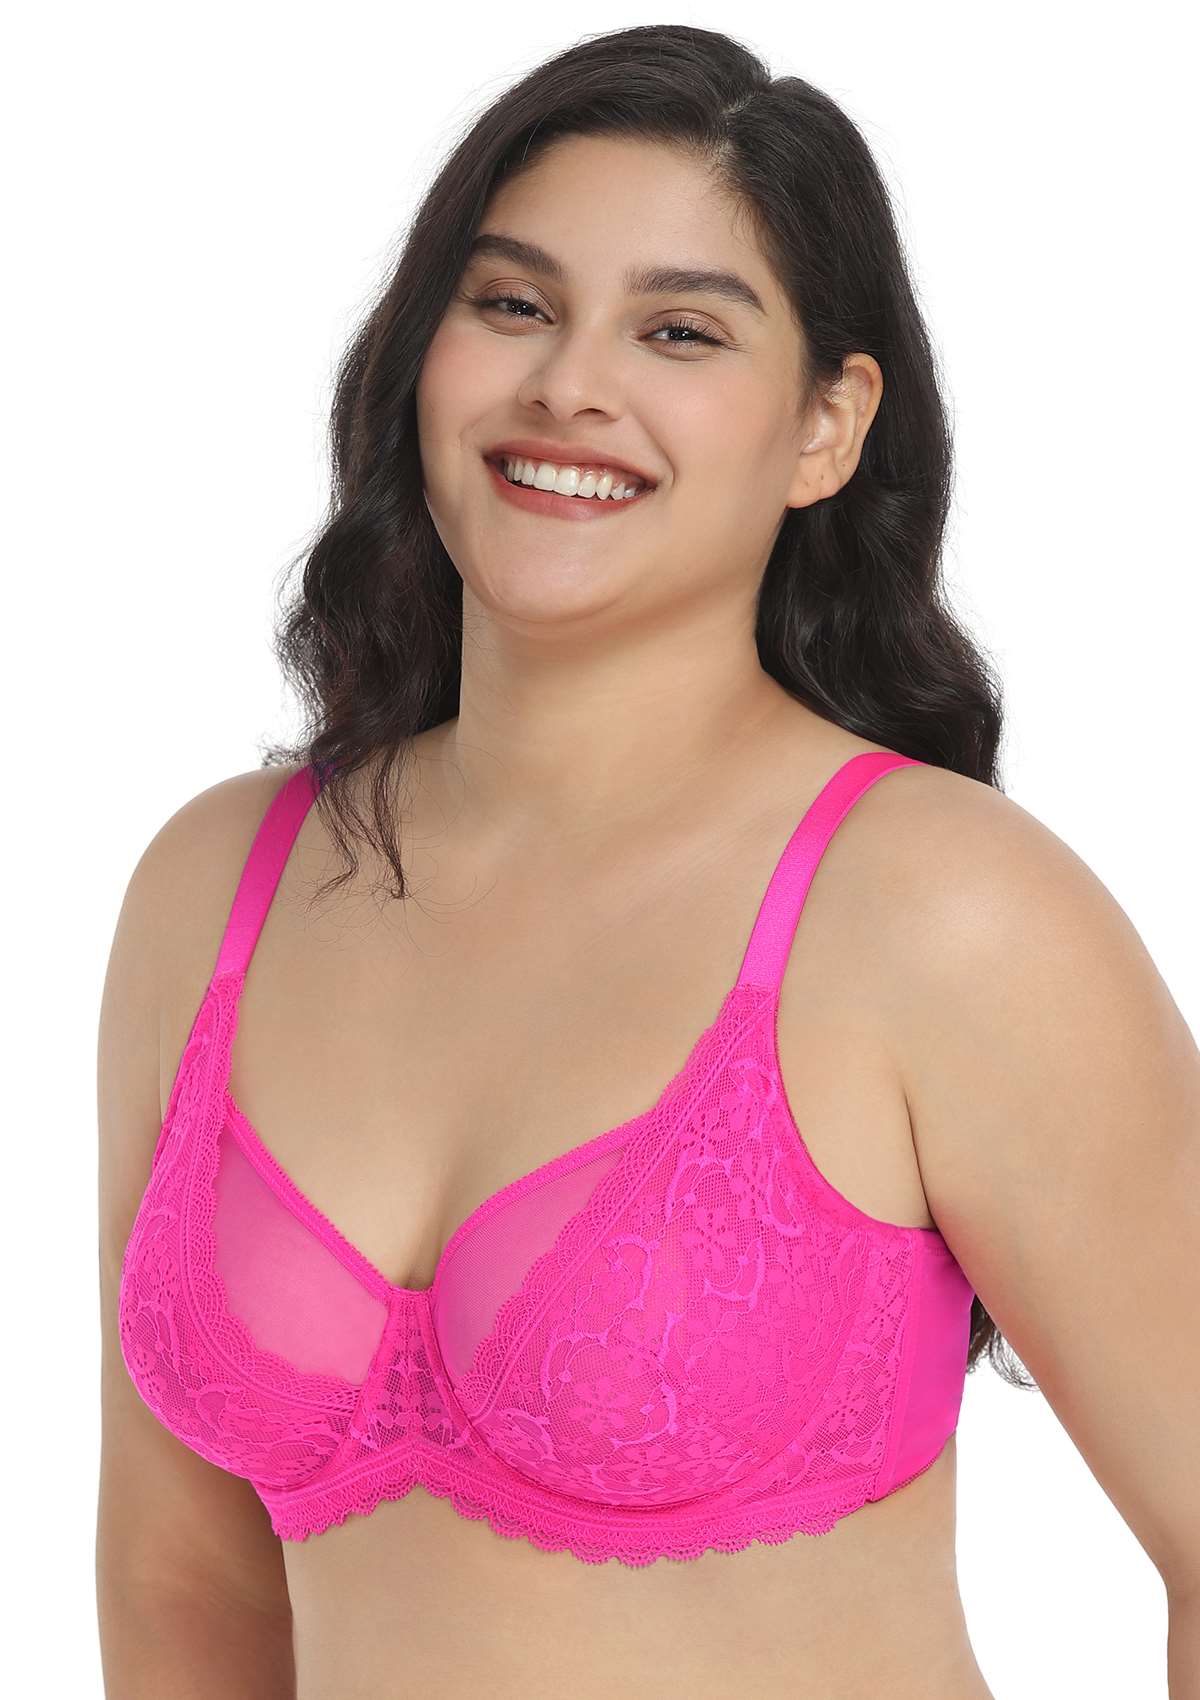 HSIA Anemone Lace Unlined Bra: Supportive, Lightweight Bra - Ginger / 36 / DD/E